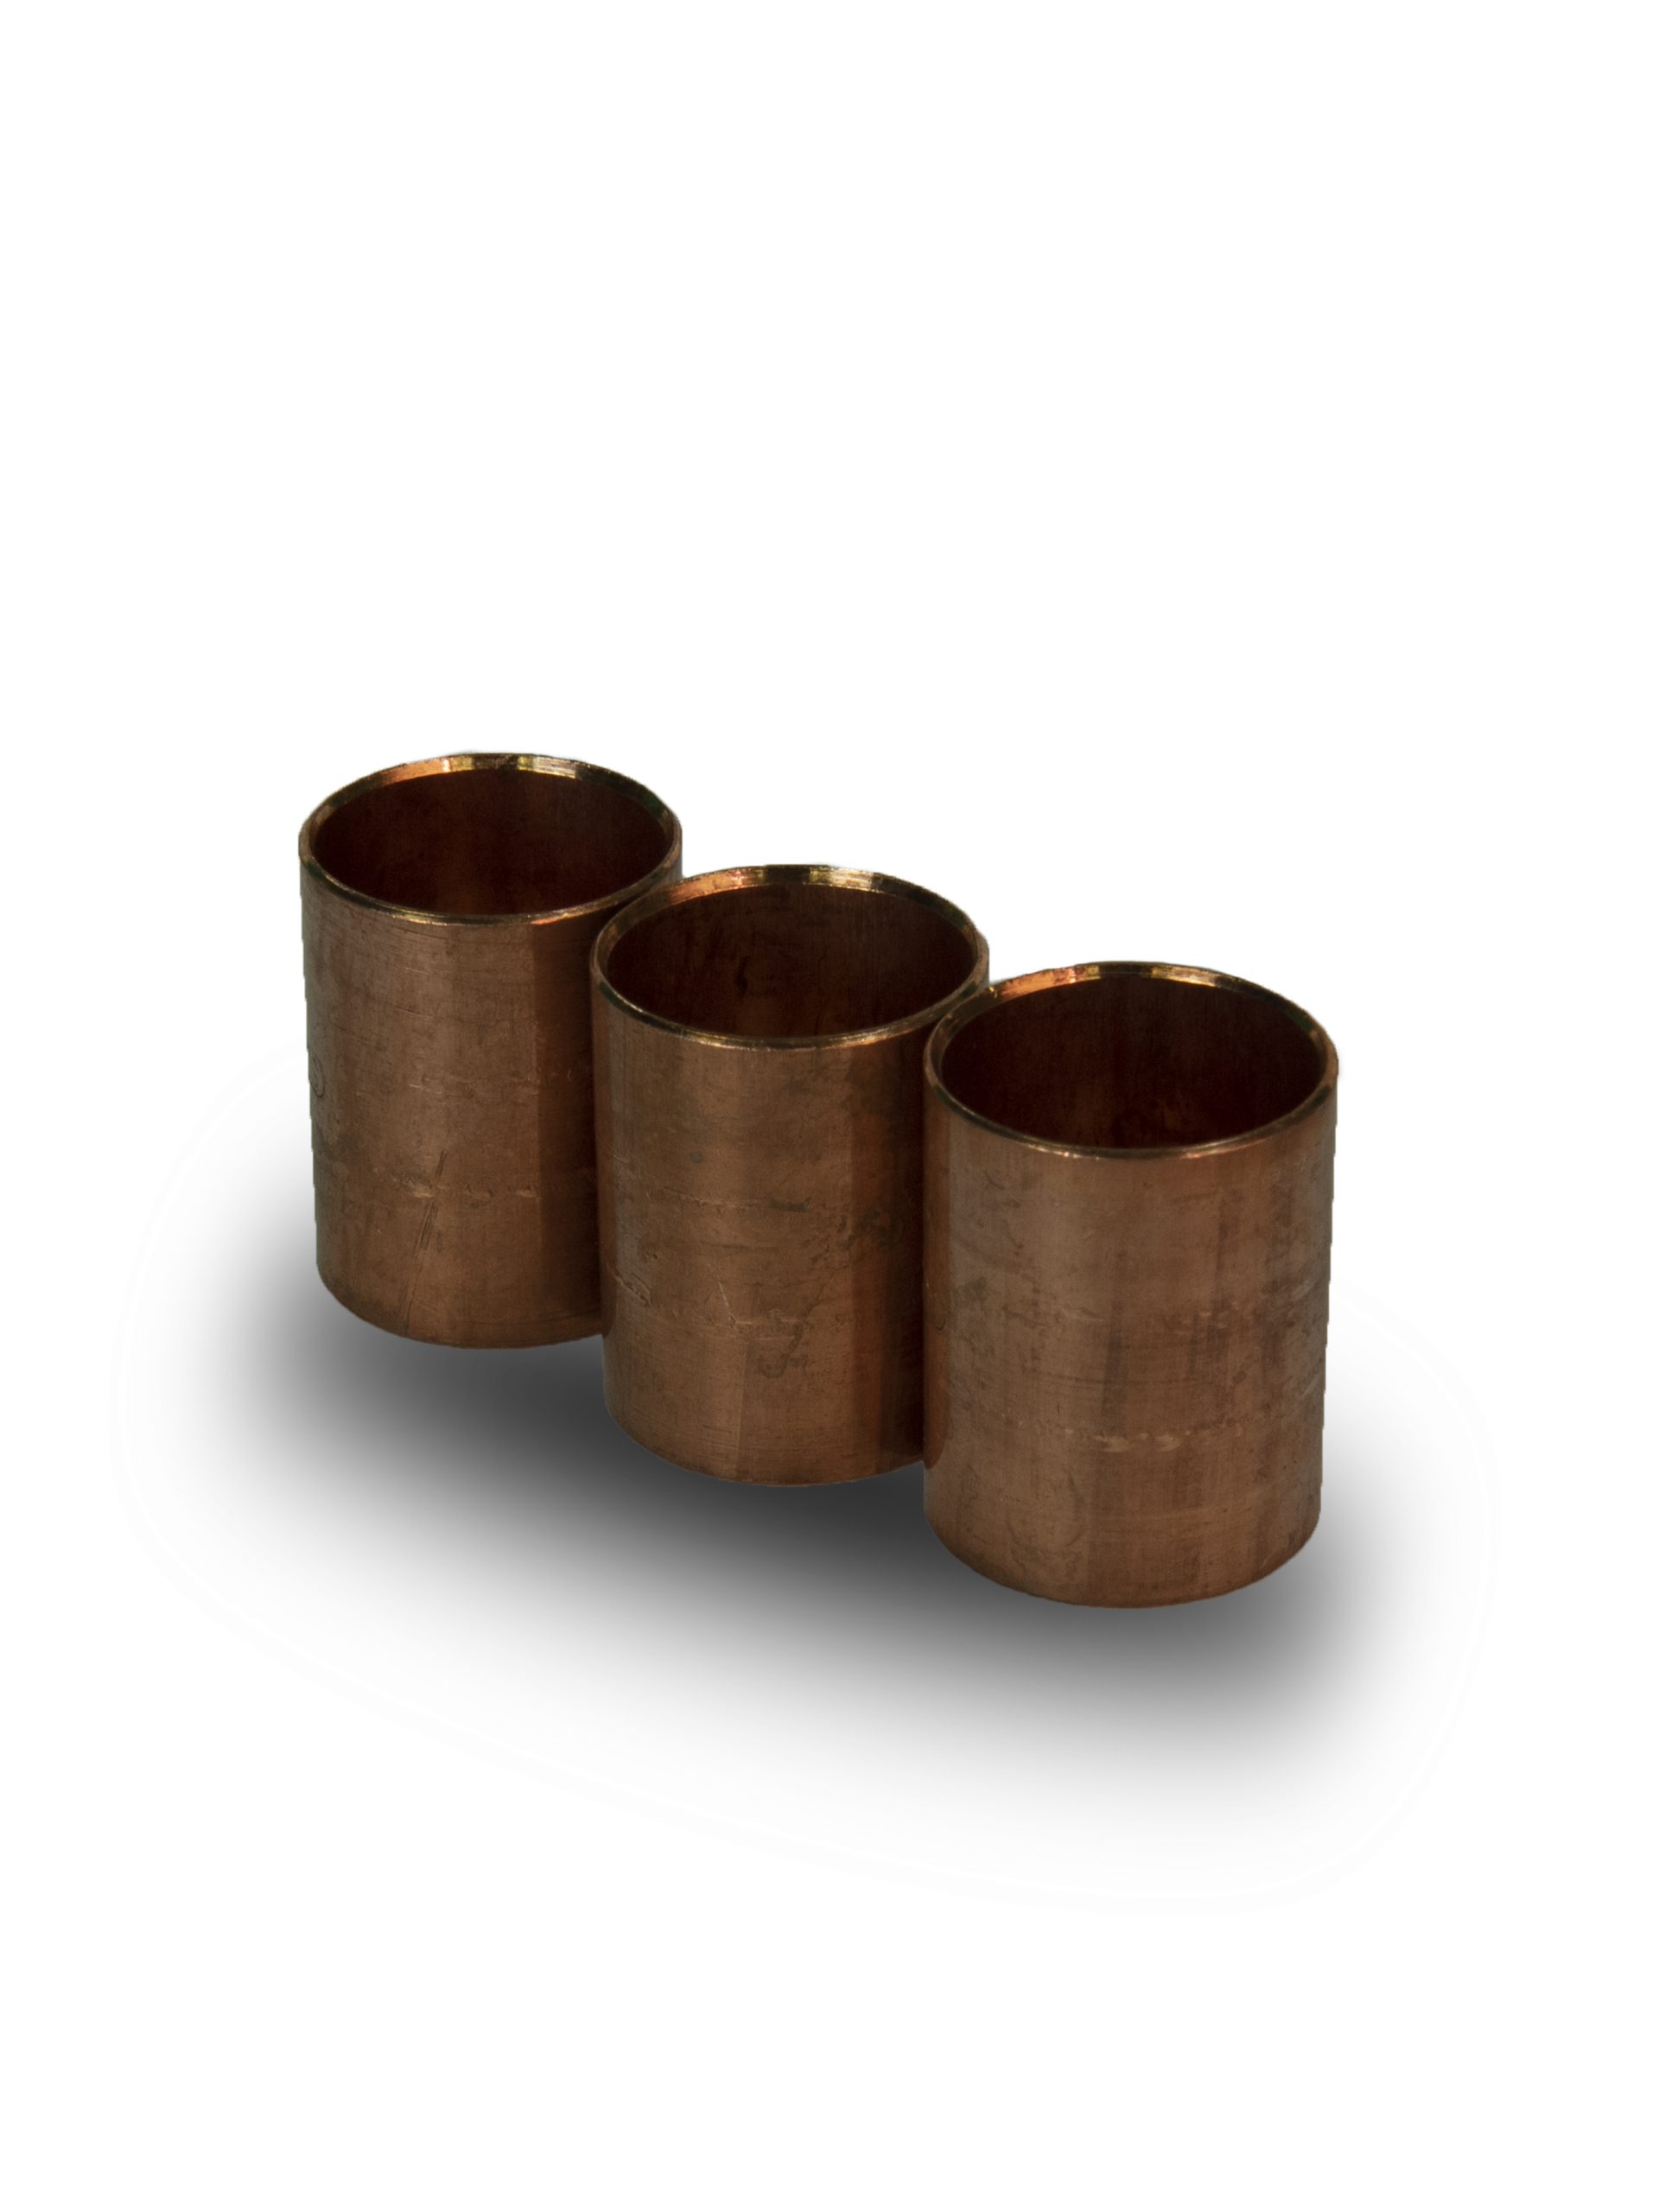 COPPER COUPLING 20MM, COMAP-CLESSE from Gas Equipment Company Llc Abu Dhabi, UNITED ARAB EMIRATES